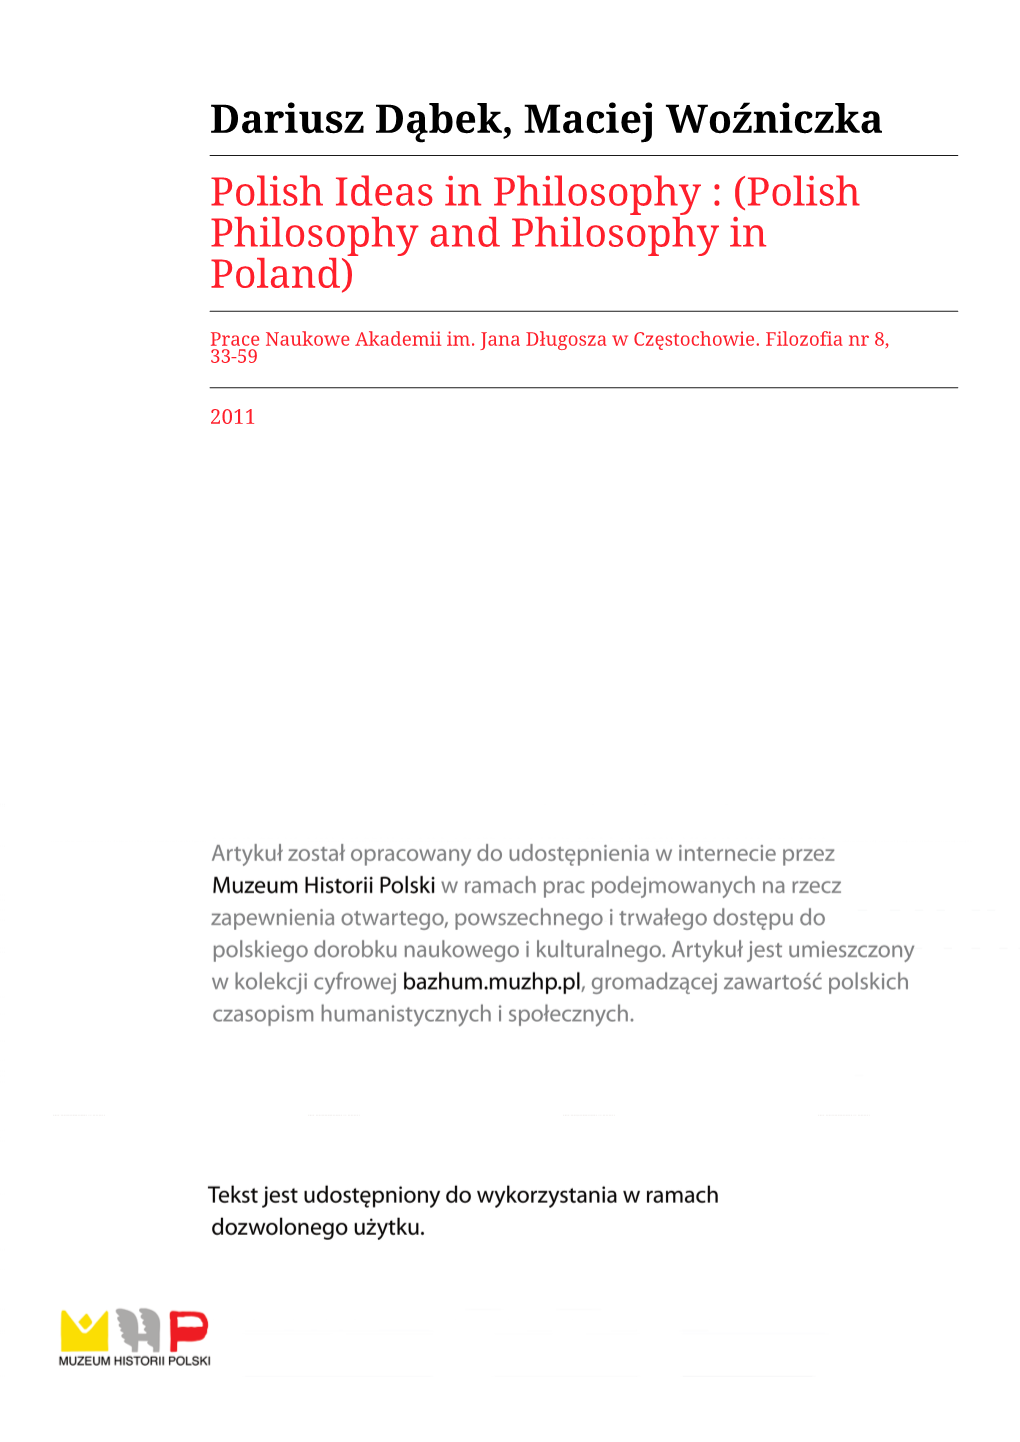 Polish Philosophy and Philosophy in Poland)